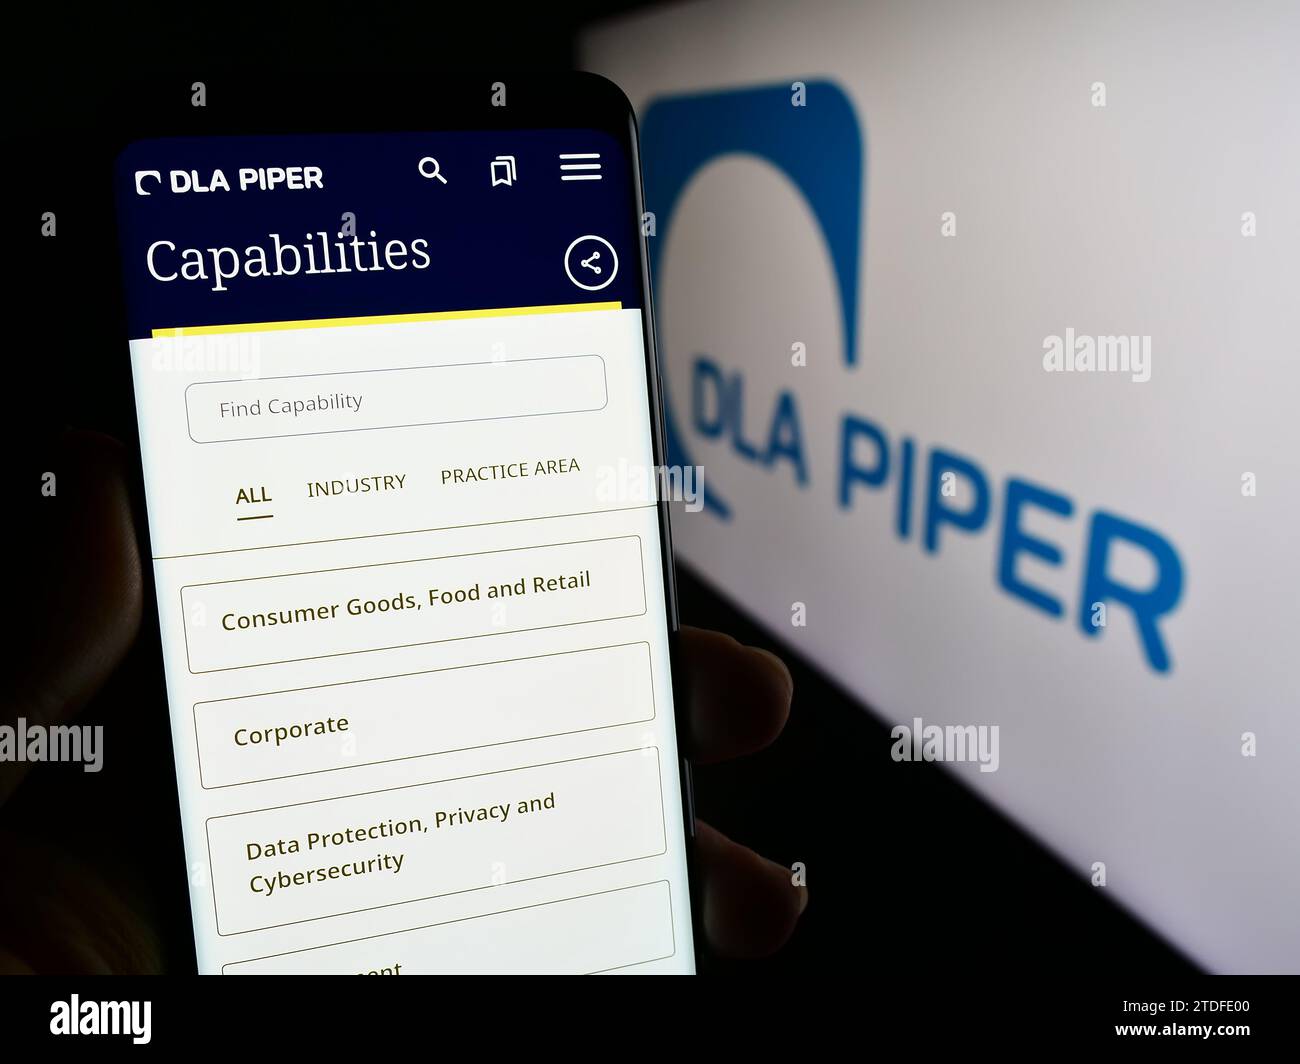 Person holding cellphone with web page of law firm DLA Piper in front of business logo. Focus on center of phone display. Stock Photo